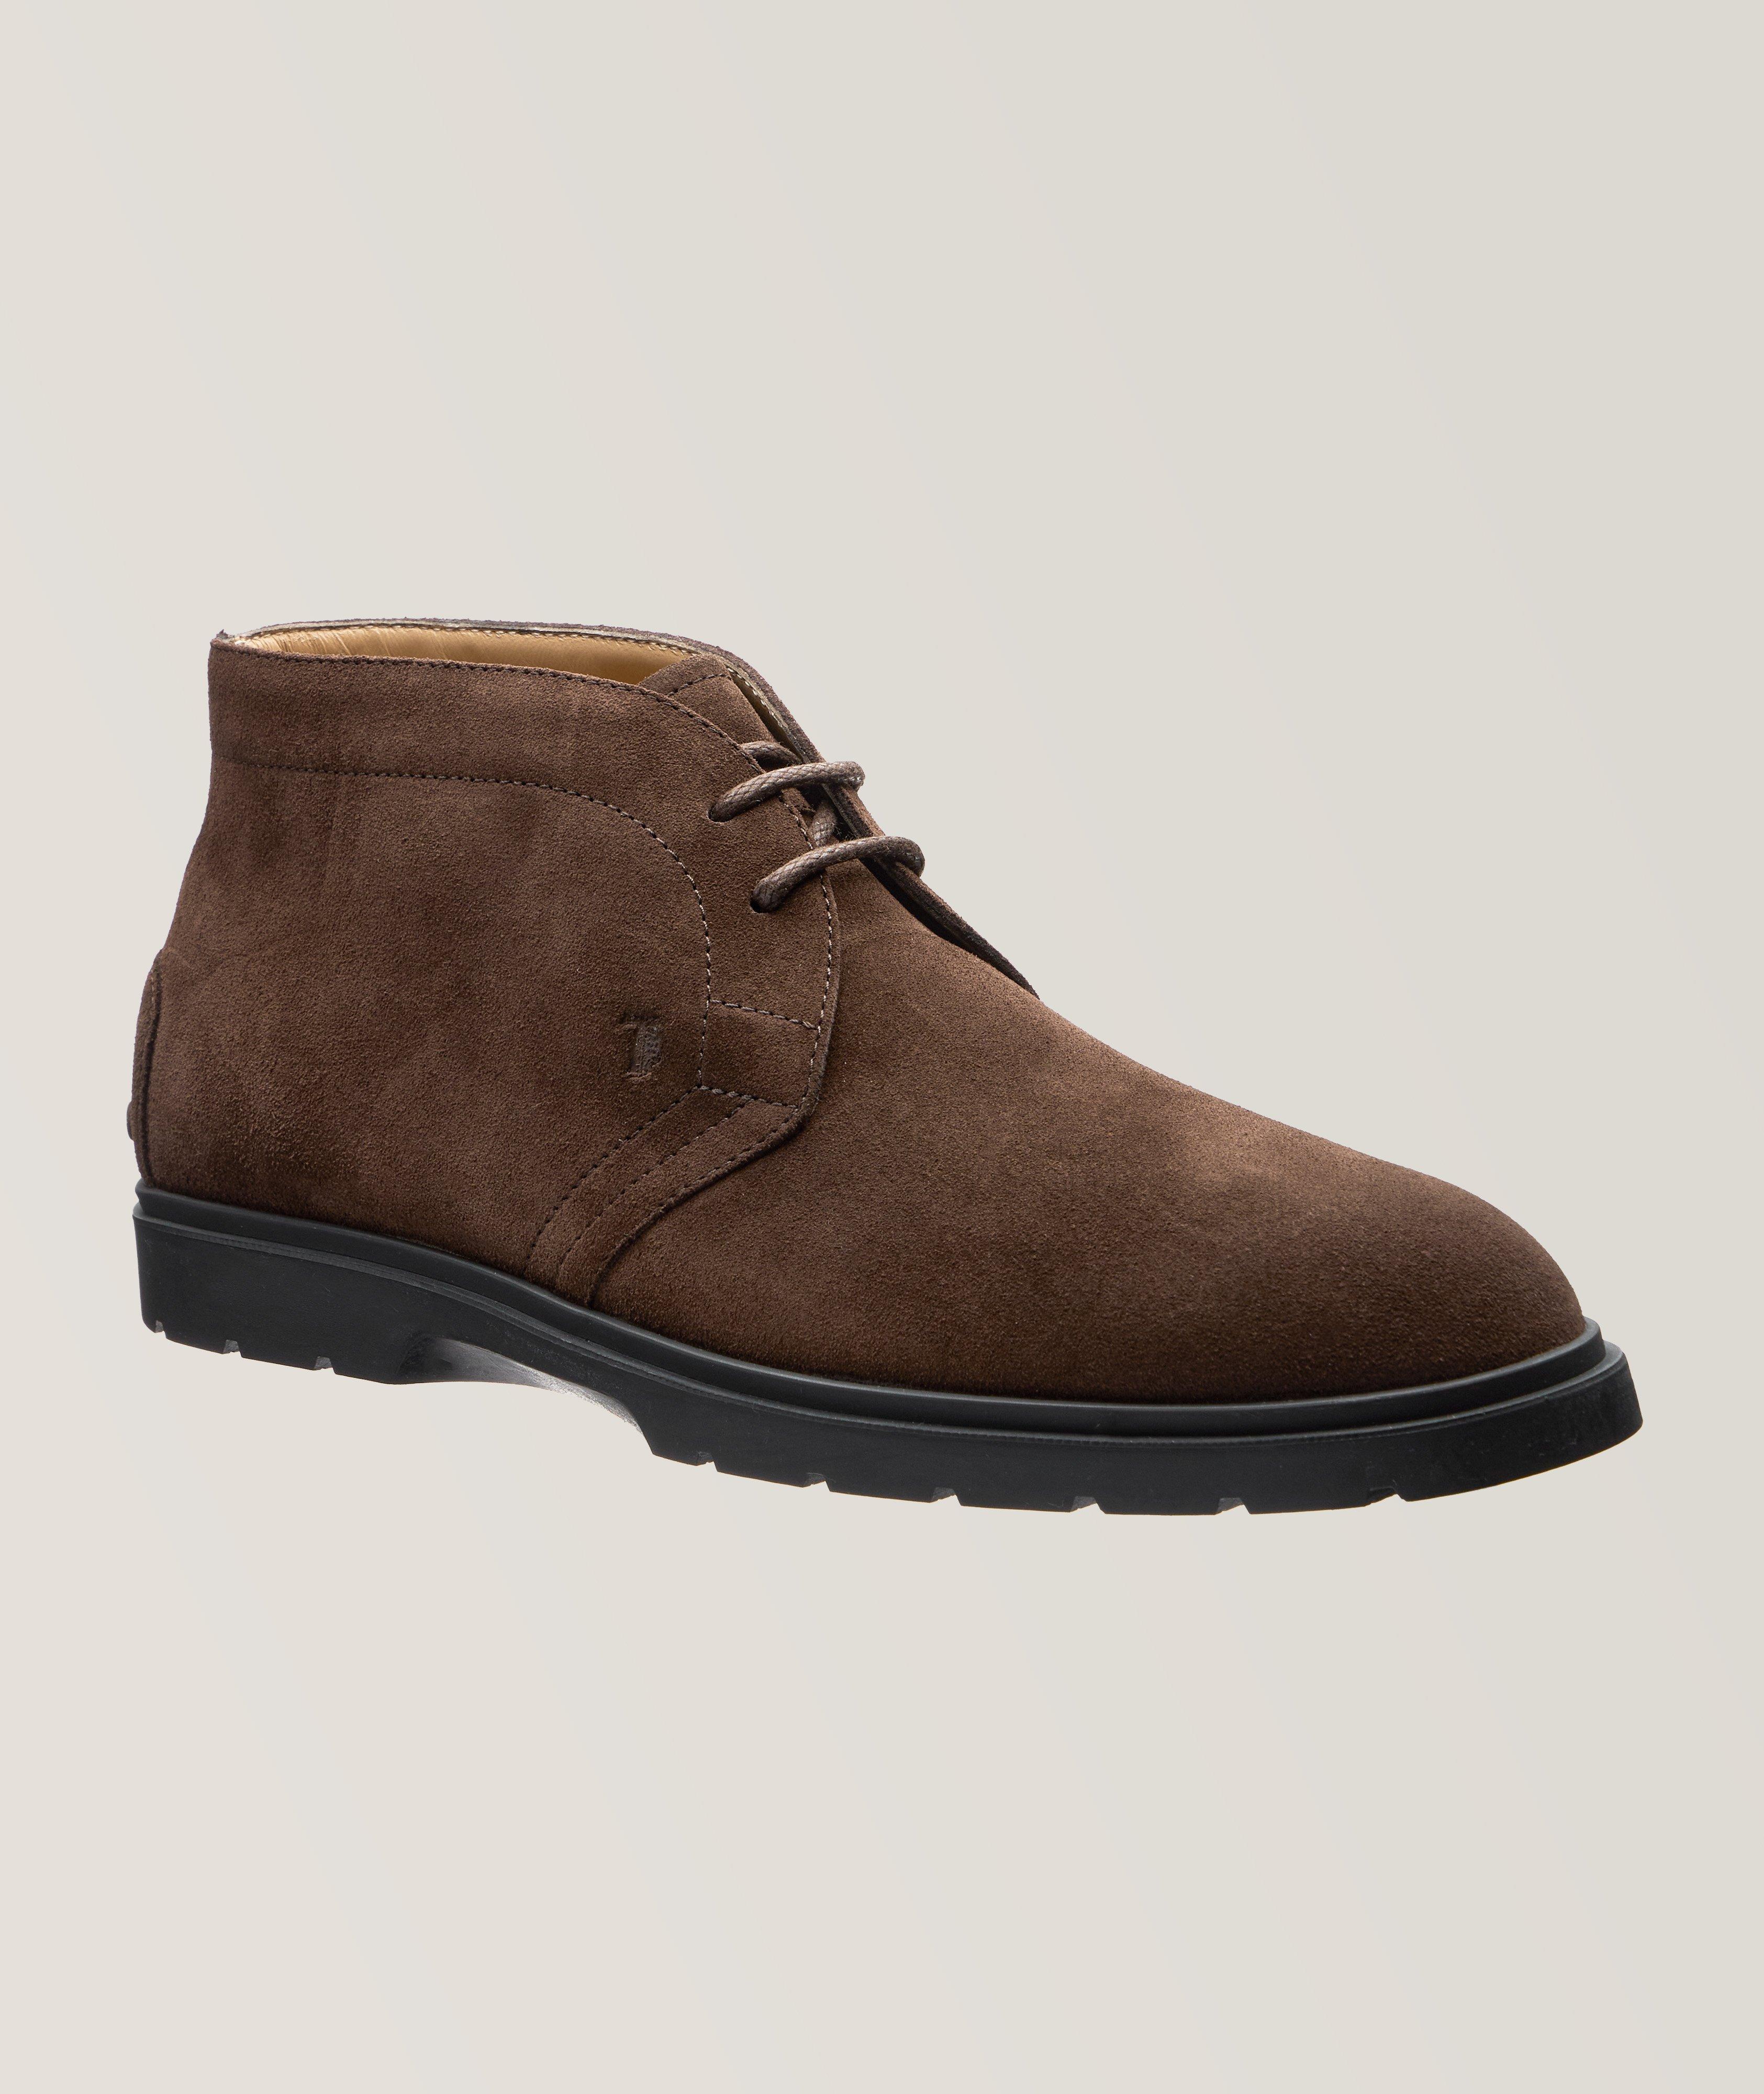 Suede Desert Boots image 0